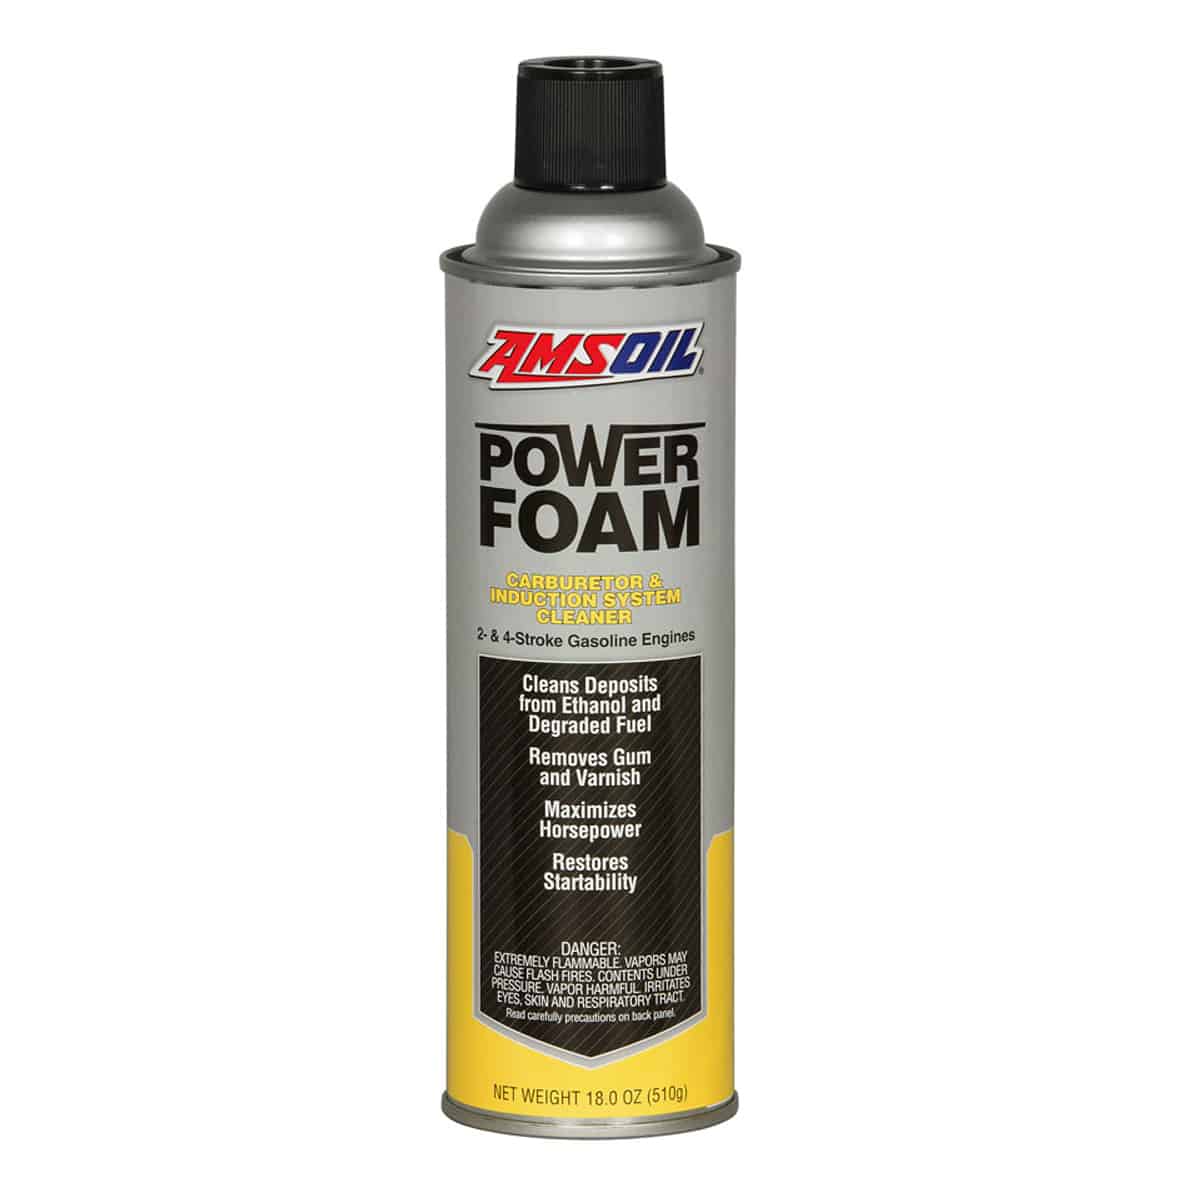 A can of AMSOIL Power Foam®, designed to improve engine performance by removing gum, varnish & carbon deposits that affect power, operation, idle & fuel economy.